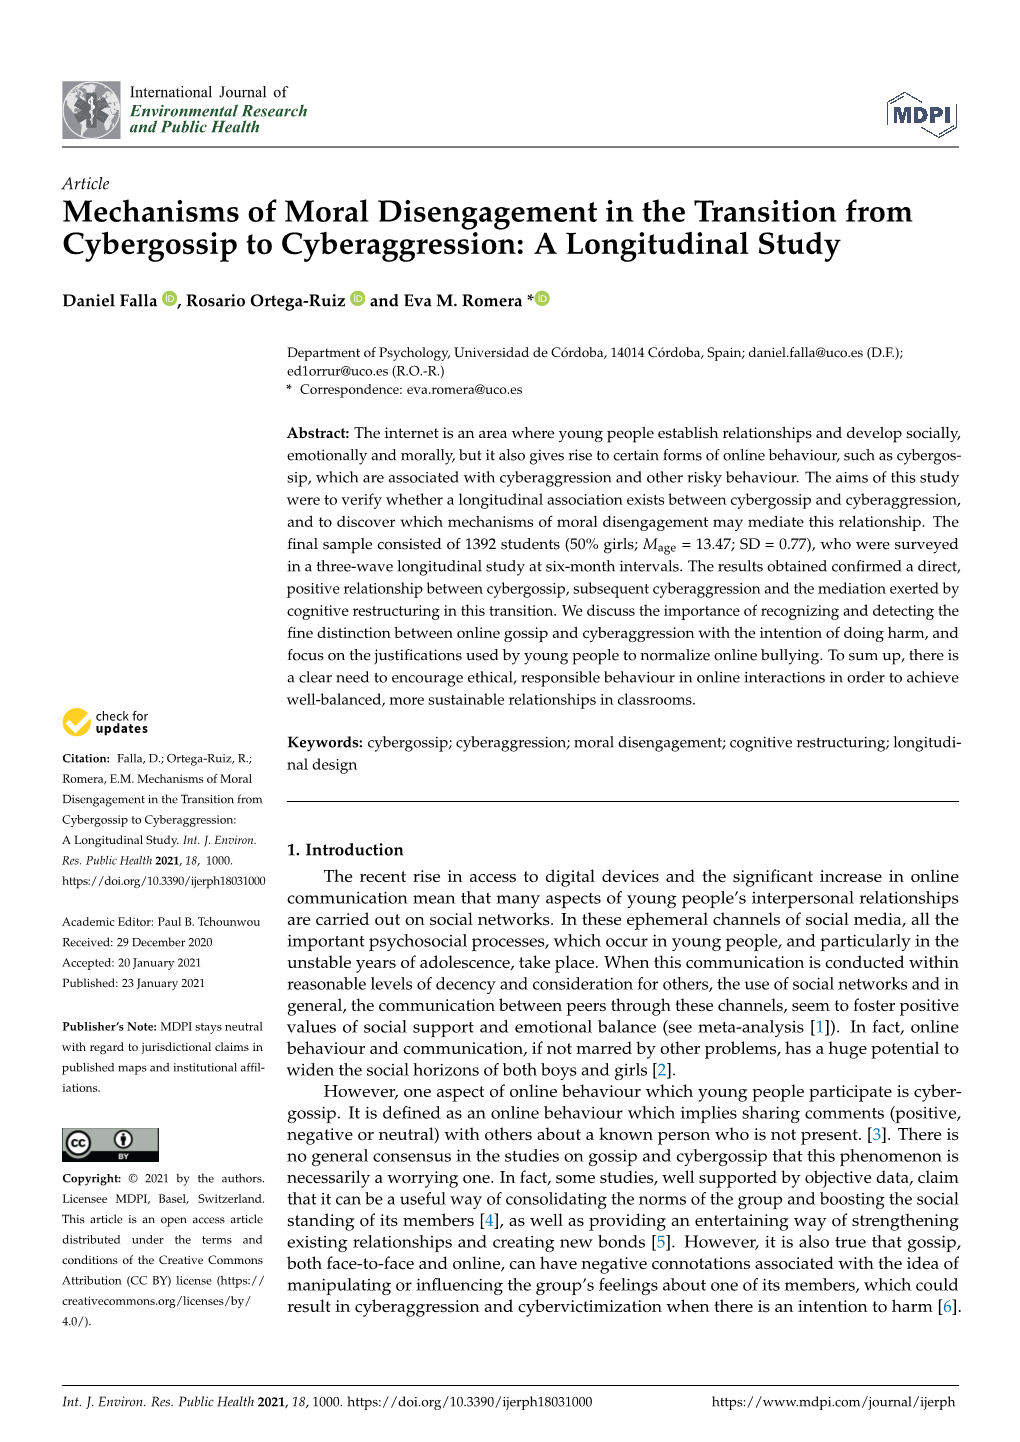 Mechanisms of Moral Disengagement in the Transition from Cybergossip to Cyberaggression: a Longitudinal Study